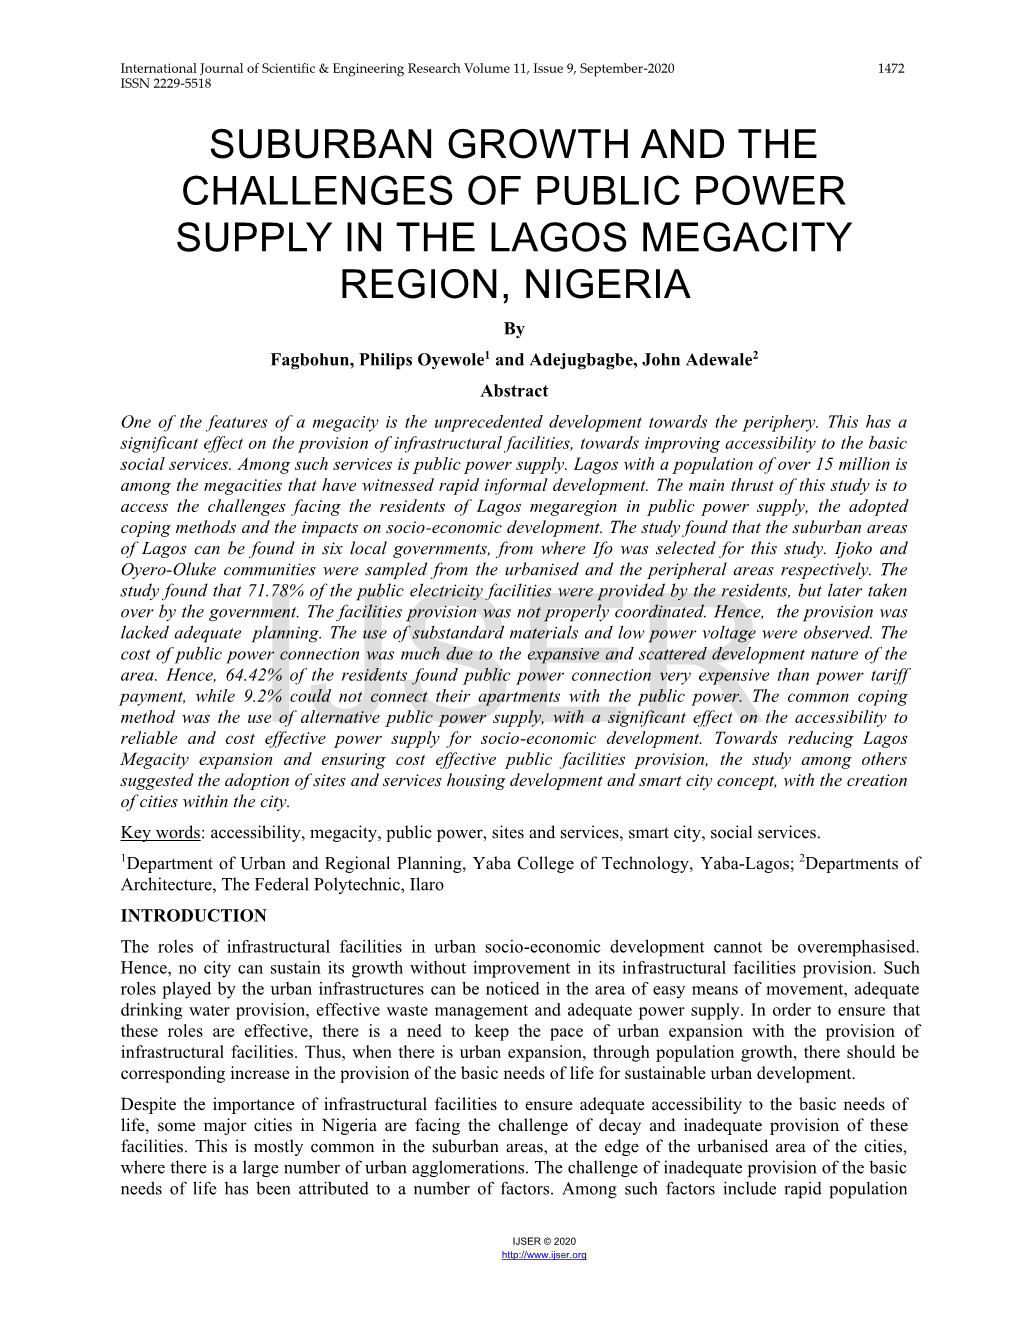 Suburban Growth and the Challenges of Public Power Supply in the Lagos